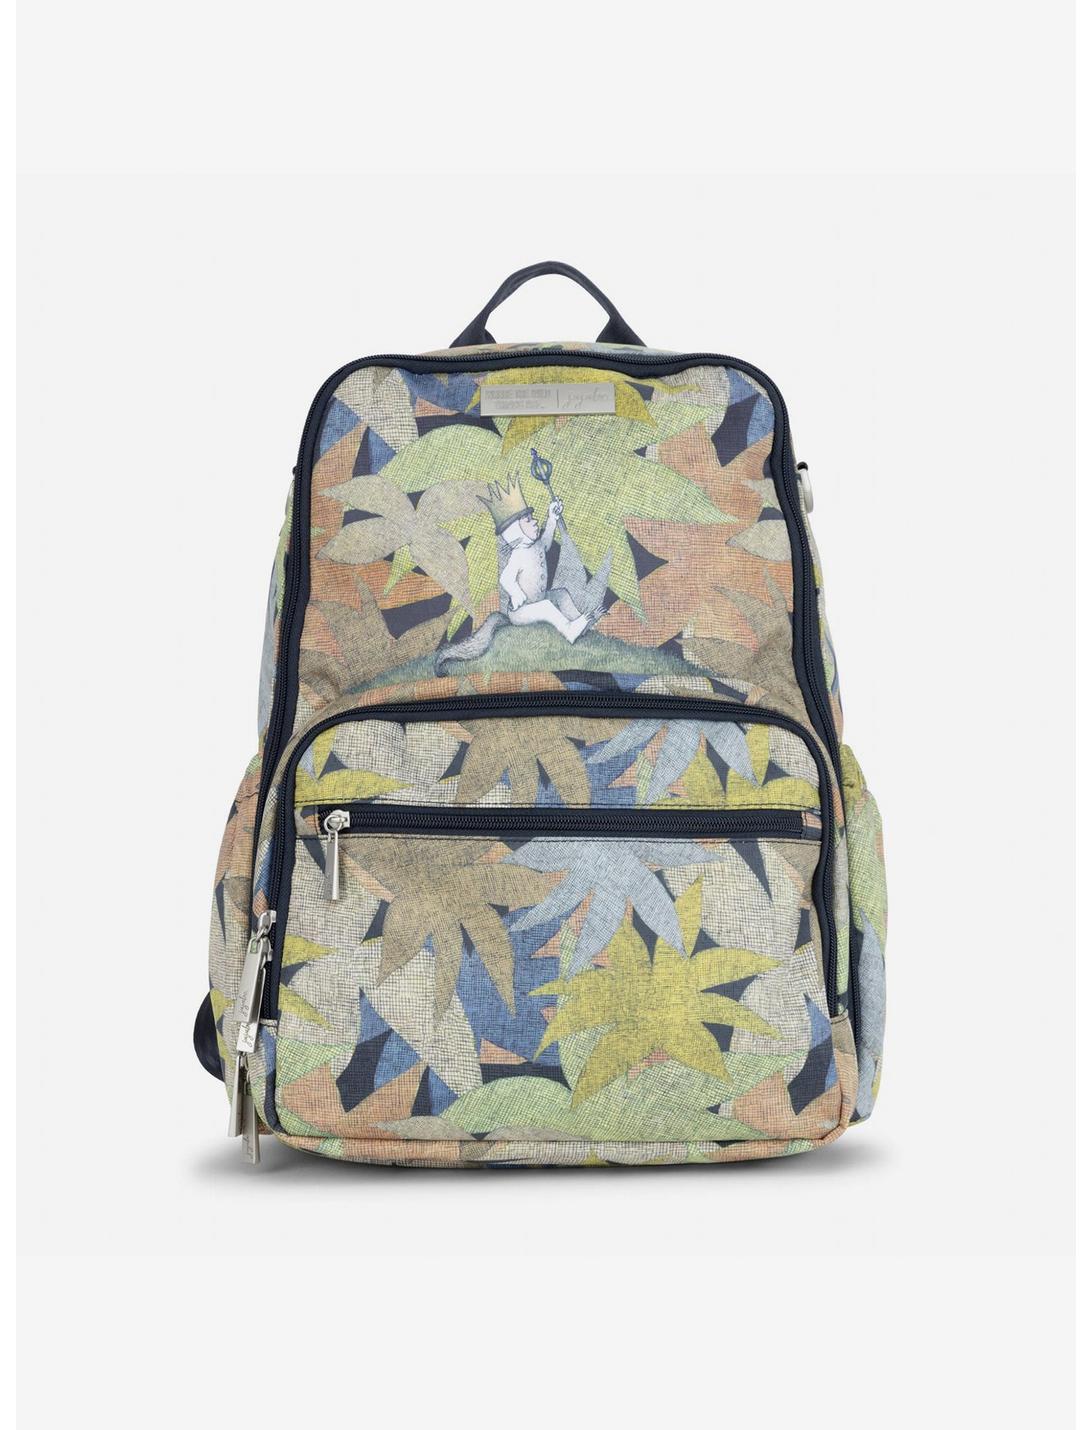 JuJuBe Where the Wild Things Are Zealous Backpack, , hi-res